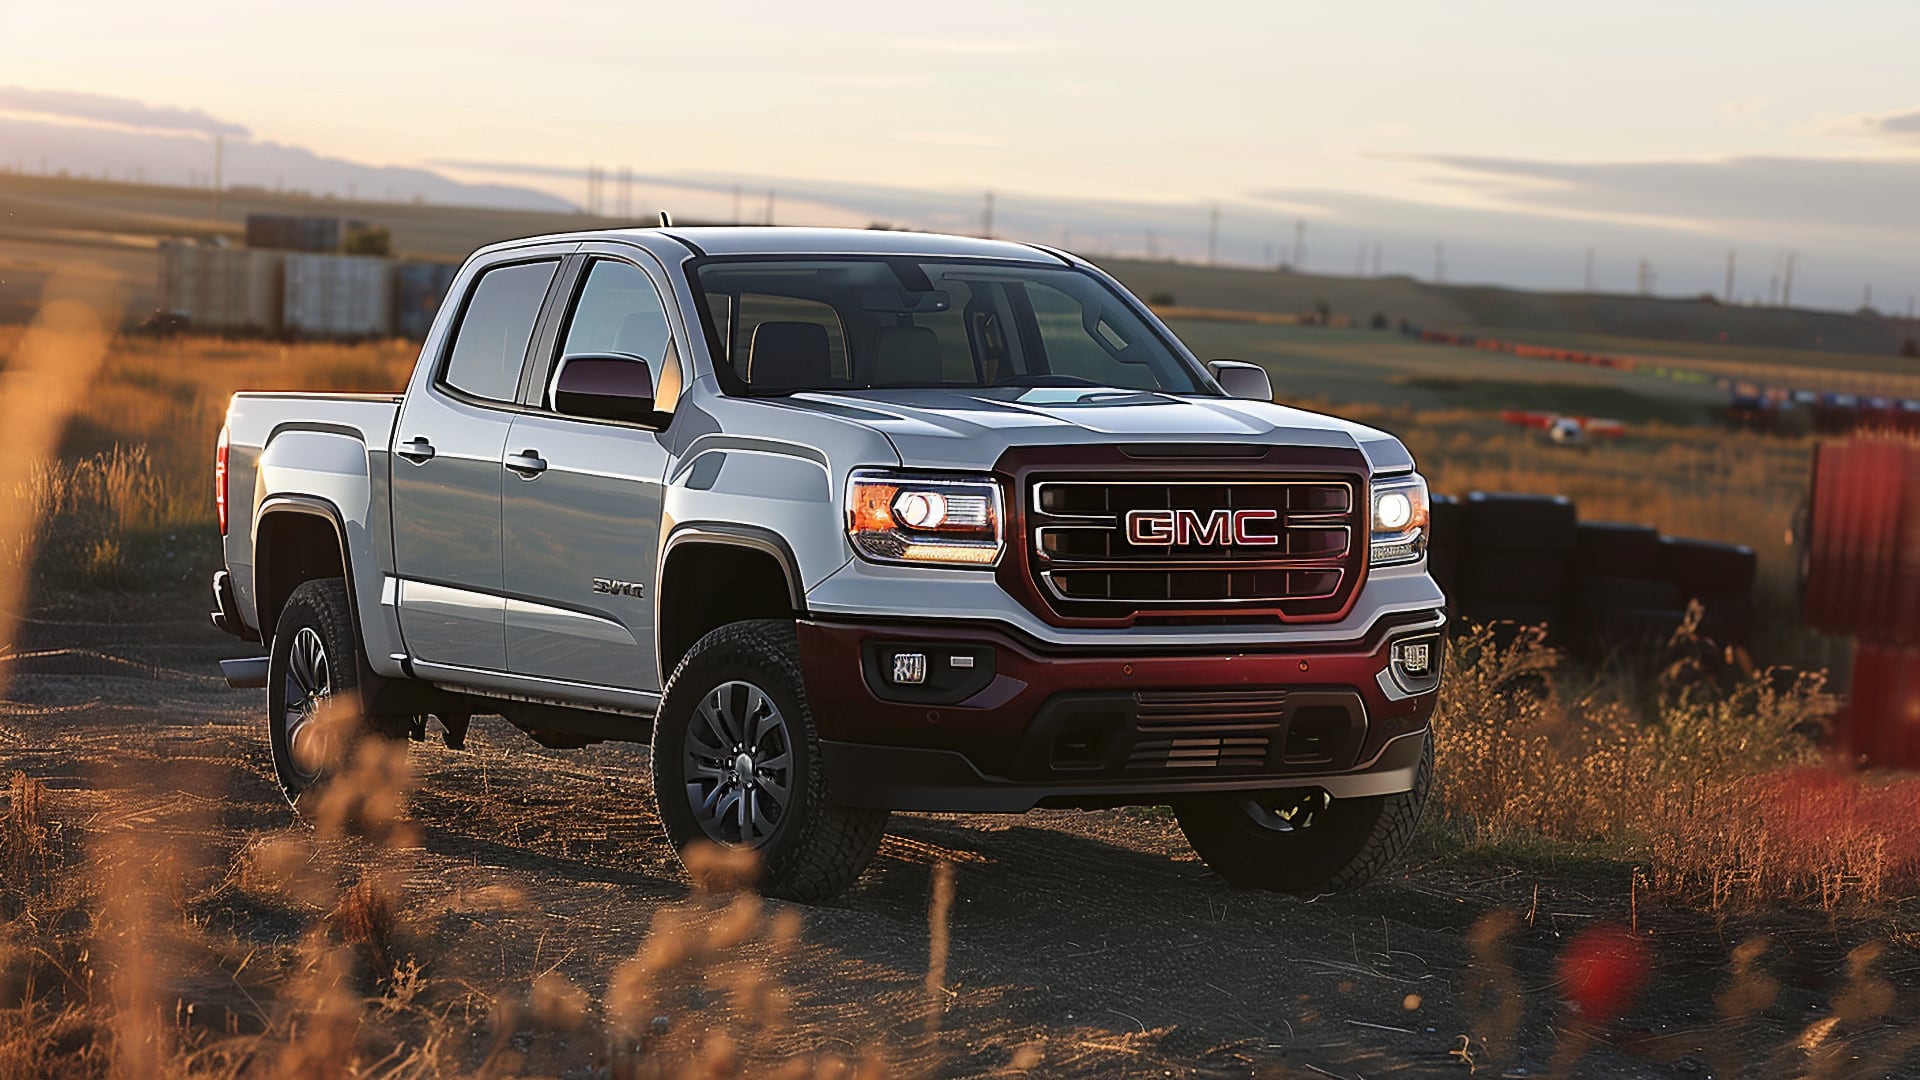 The 2019 GMC Canyon is driving down a dirt road.